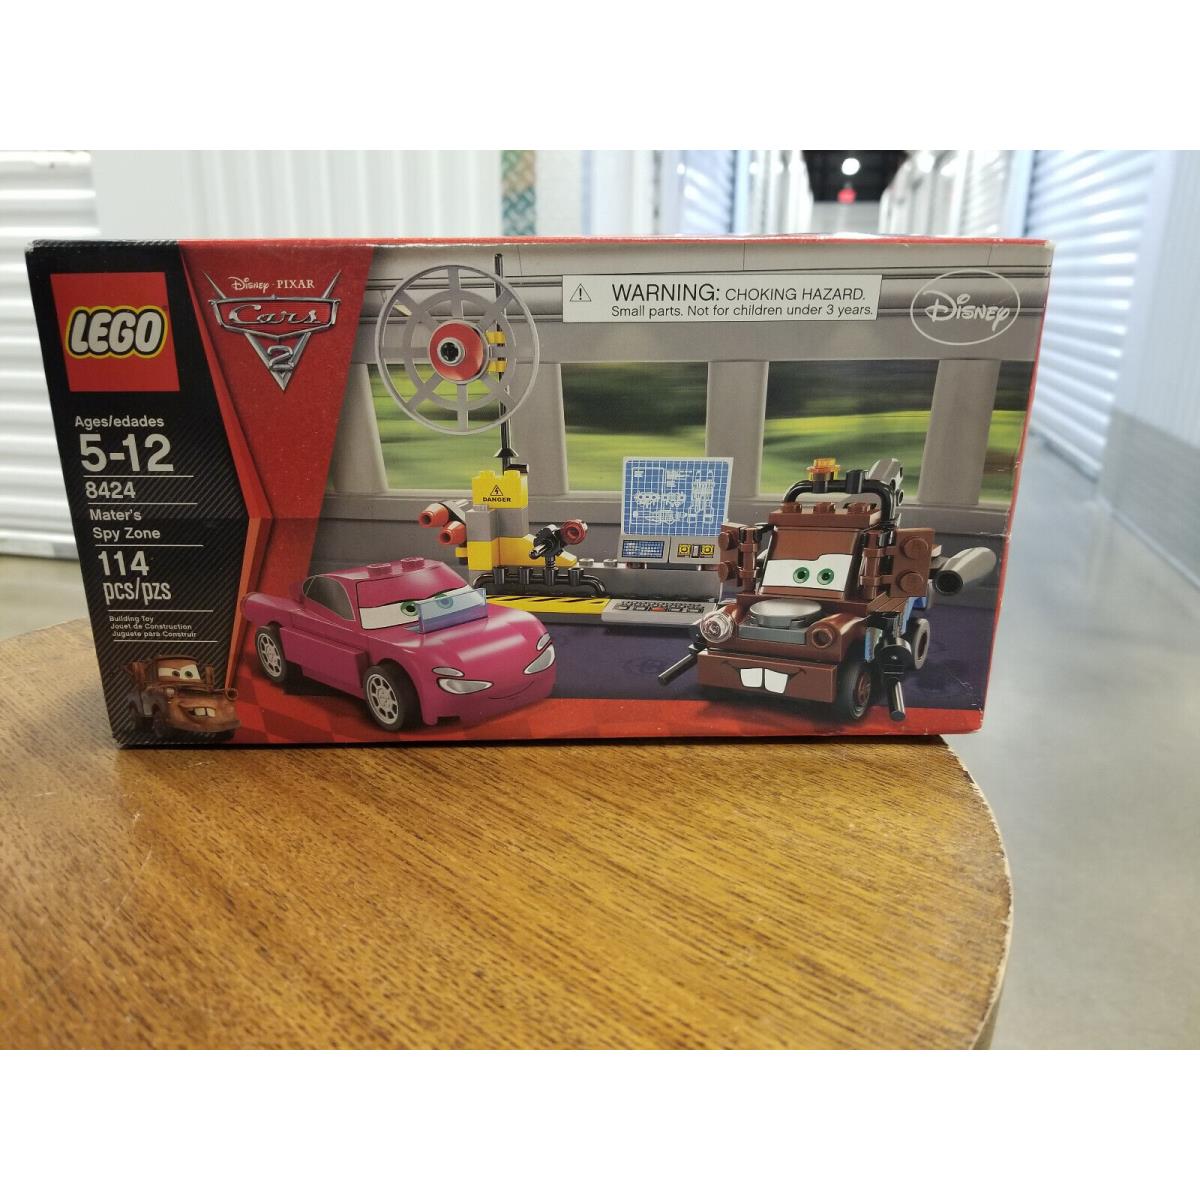 Lego 8424 Disney Cars Maters Spy Zone Holly Shift Well Jet Mission Race Agent US